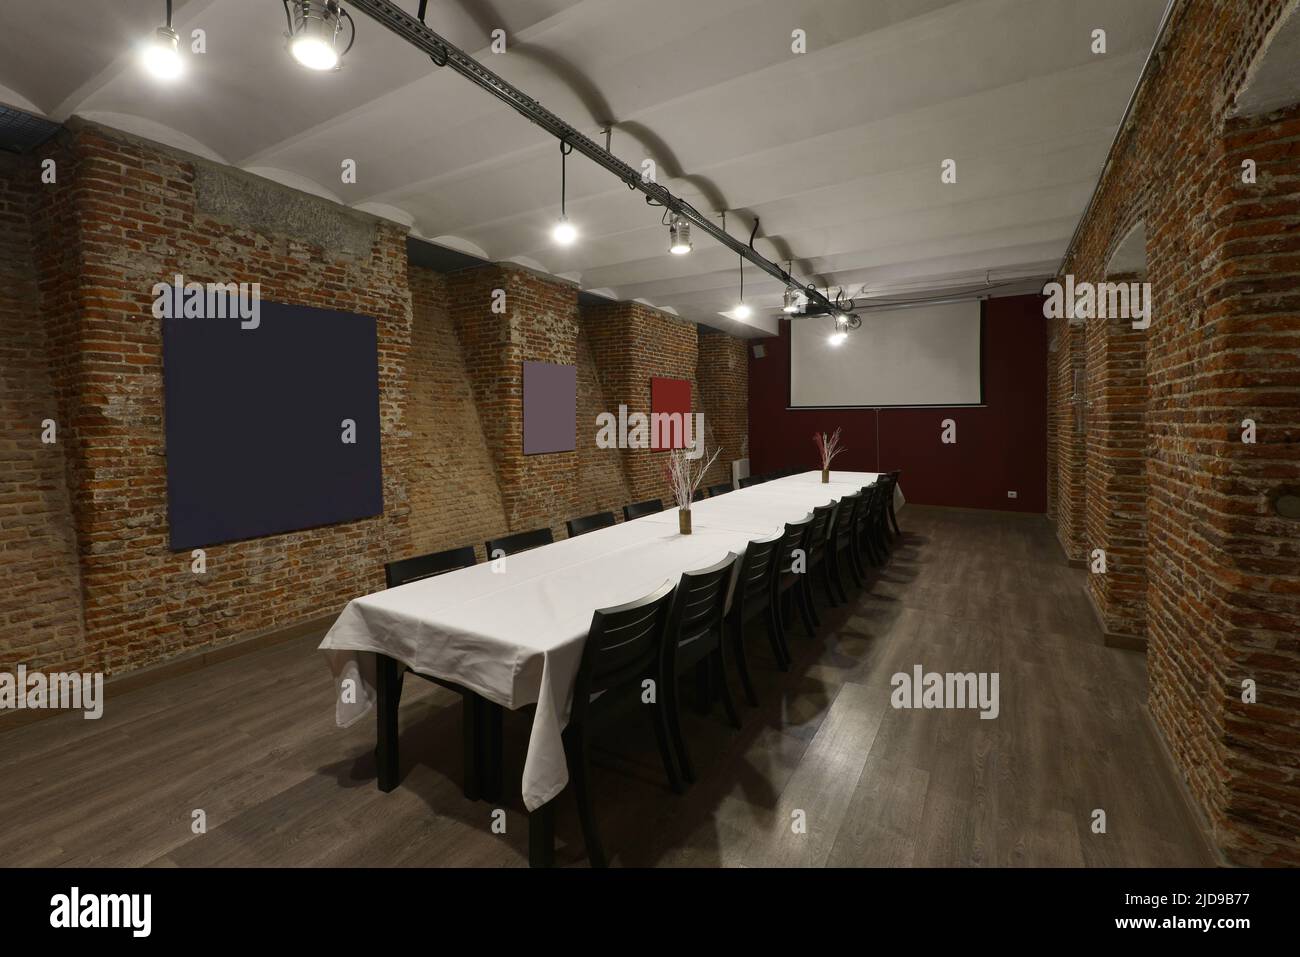 Elongated dining table in a restaurant with a basement and exposed brick walls with vaulted ceilings Stock Photo